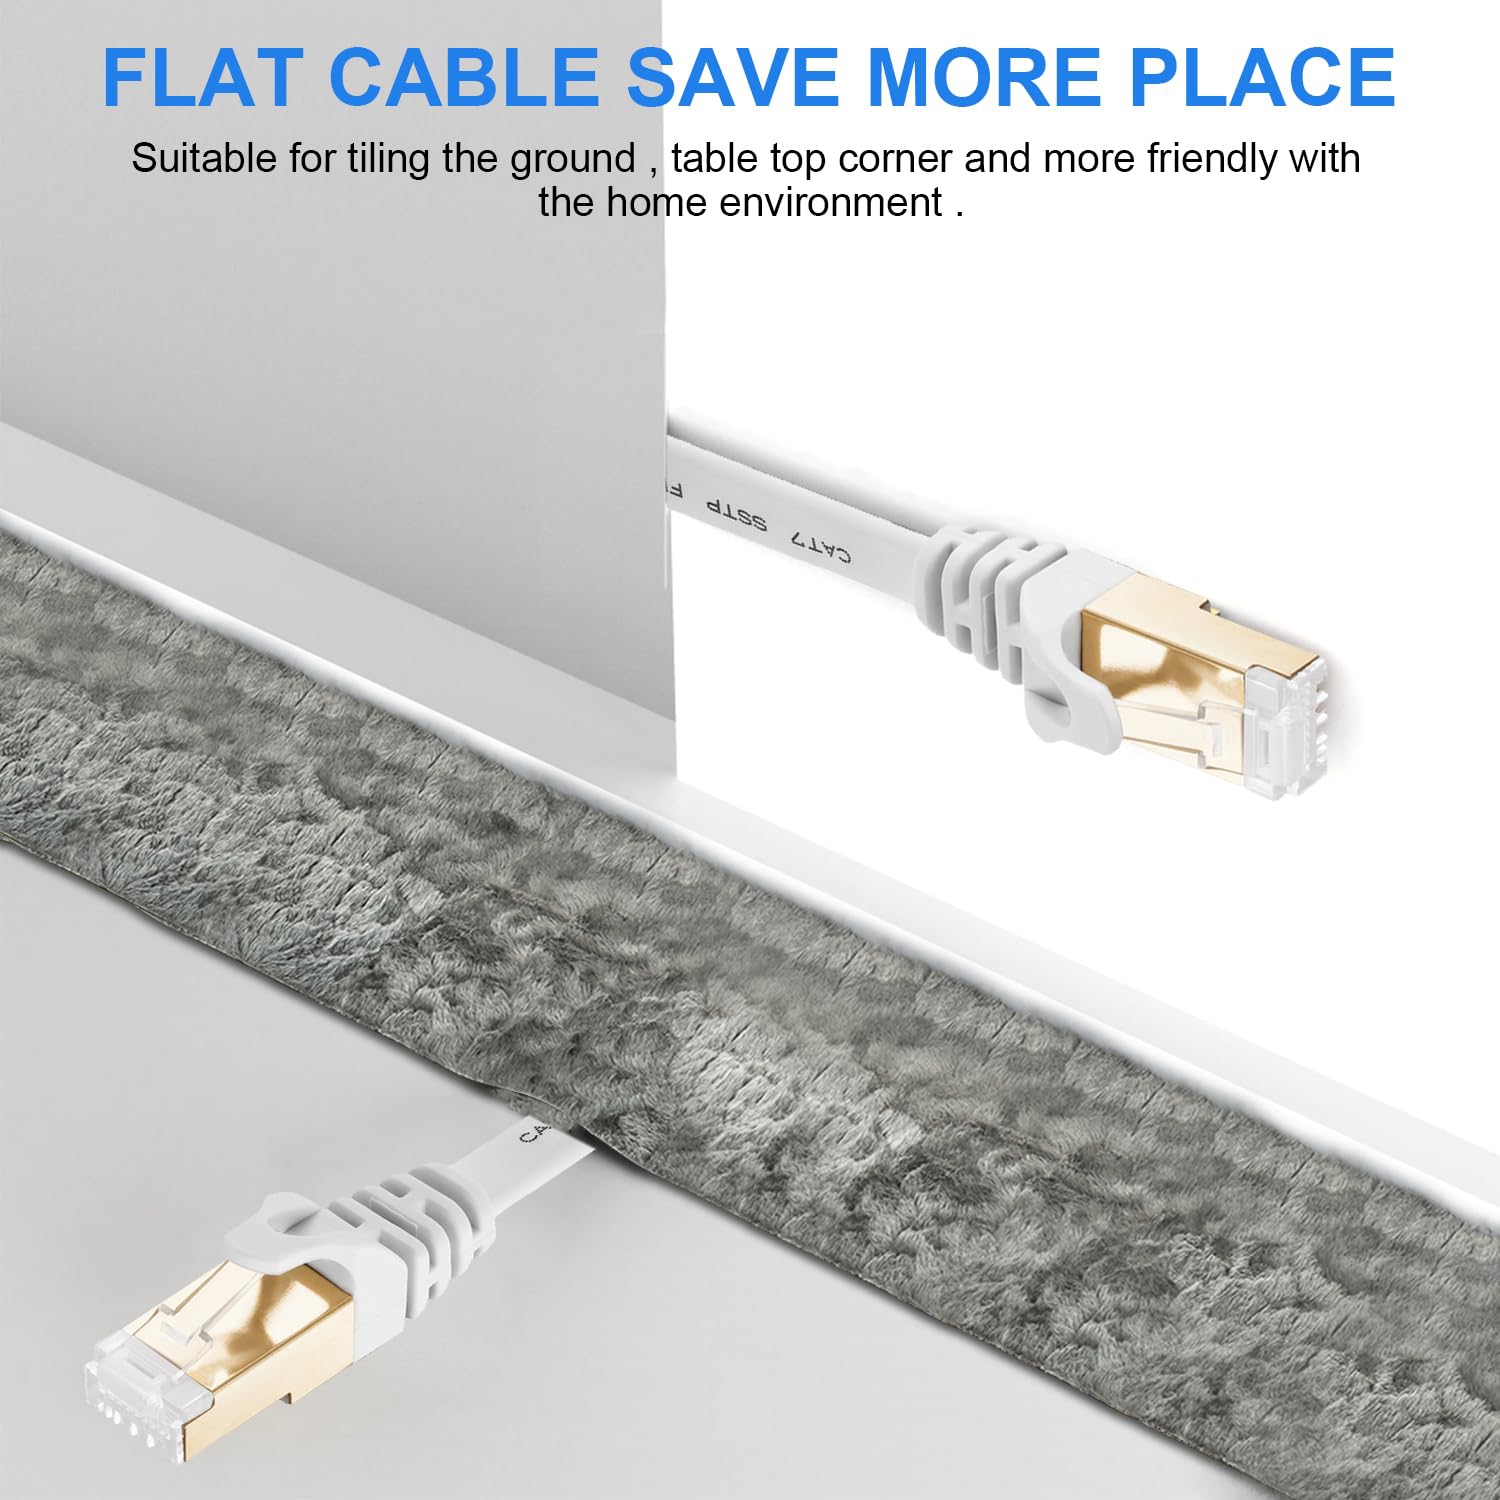 Cat7 Ethernet Cable 15FT-White, 10Gbps Shielded & GND Internet Network Cord,  High-Speed Cat 7 Flat Patch Cable for Hub, Router, Modem, Mac, PC, Laptop,  Xbox, PS, NAS, Cat6, CAT5 